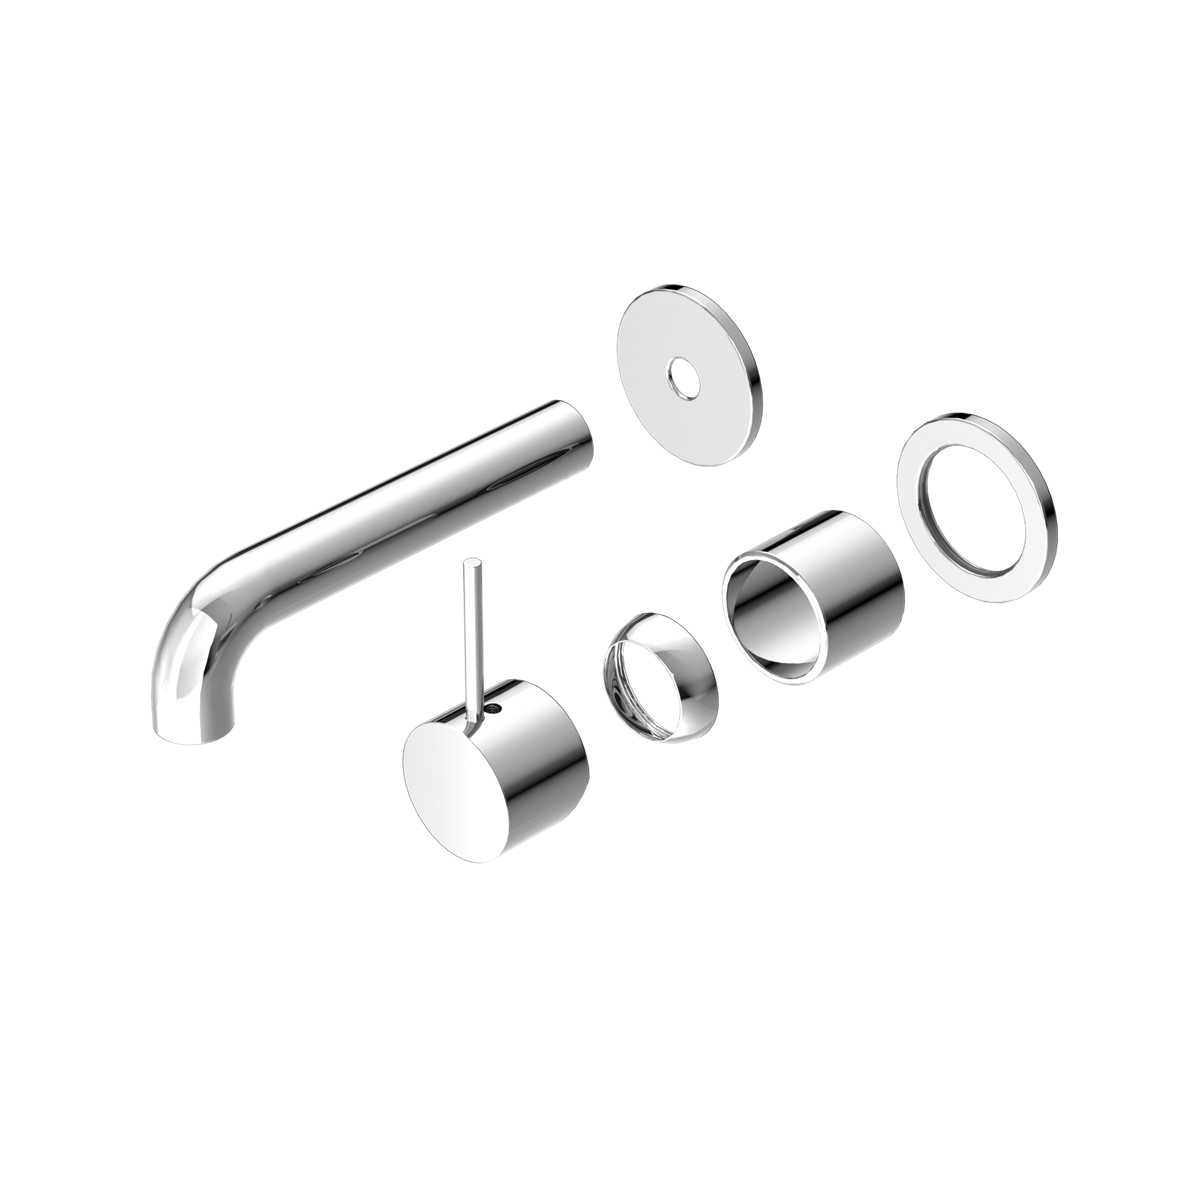 Nero Mecca Wall Basin/Bath Mixer Up Handle Trim Kit Separate Plates NR221910dt